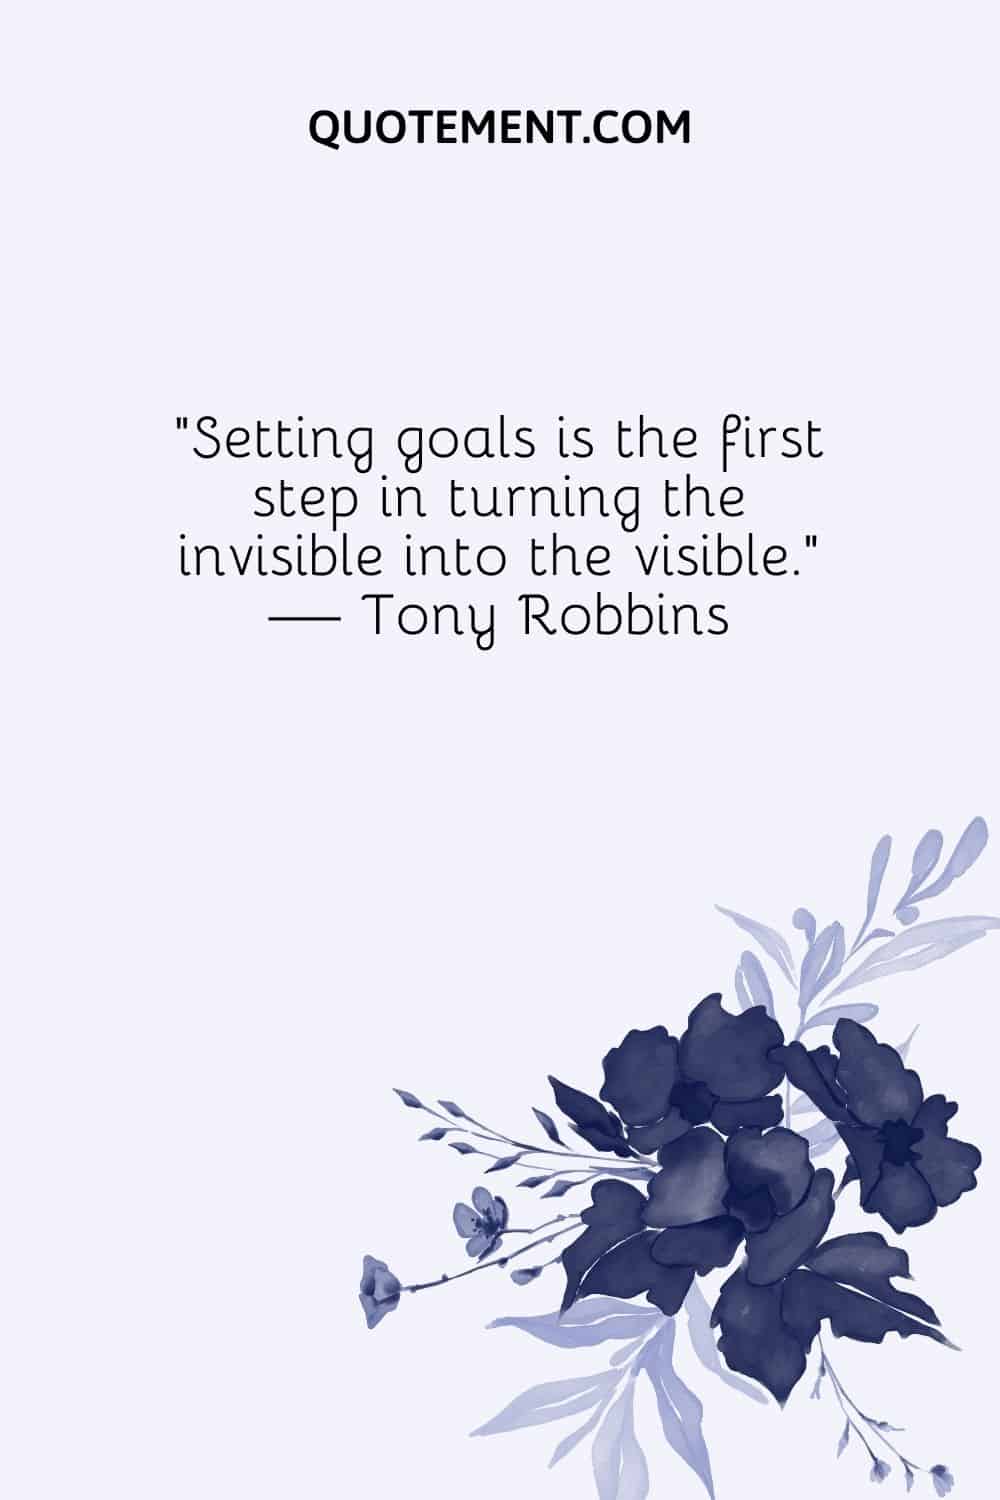 Setting goals is the first step in turning the invisible into the visible